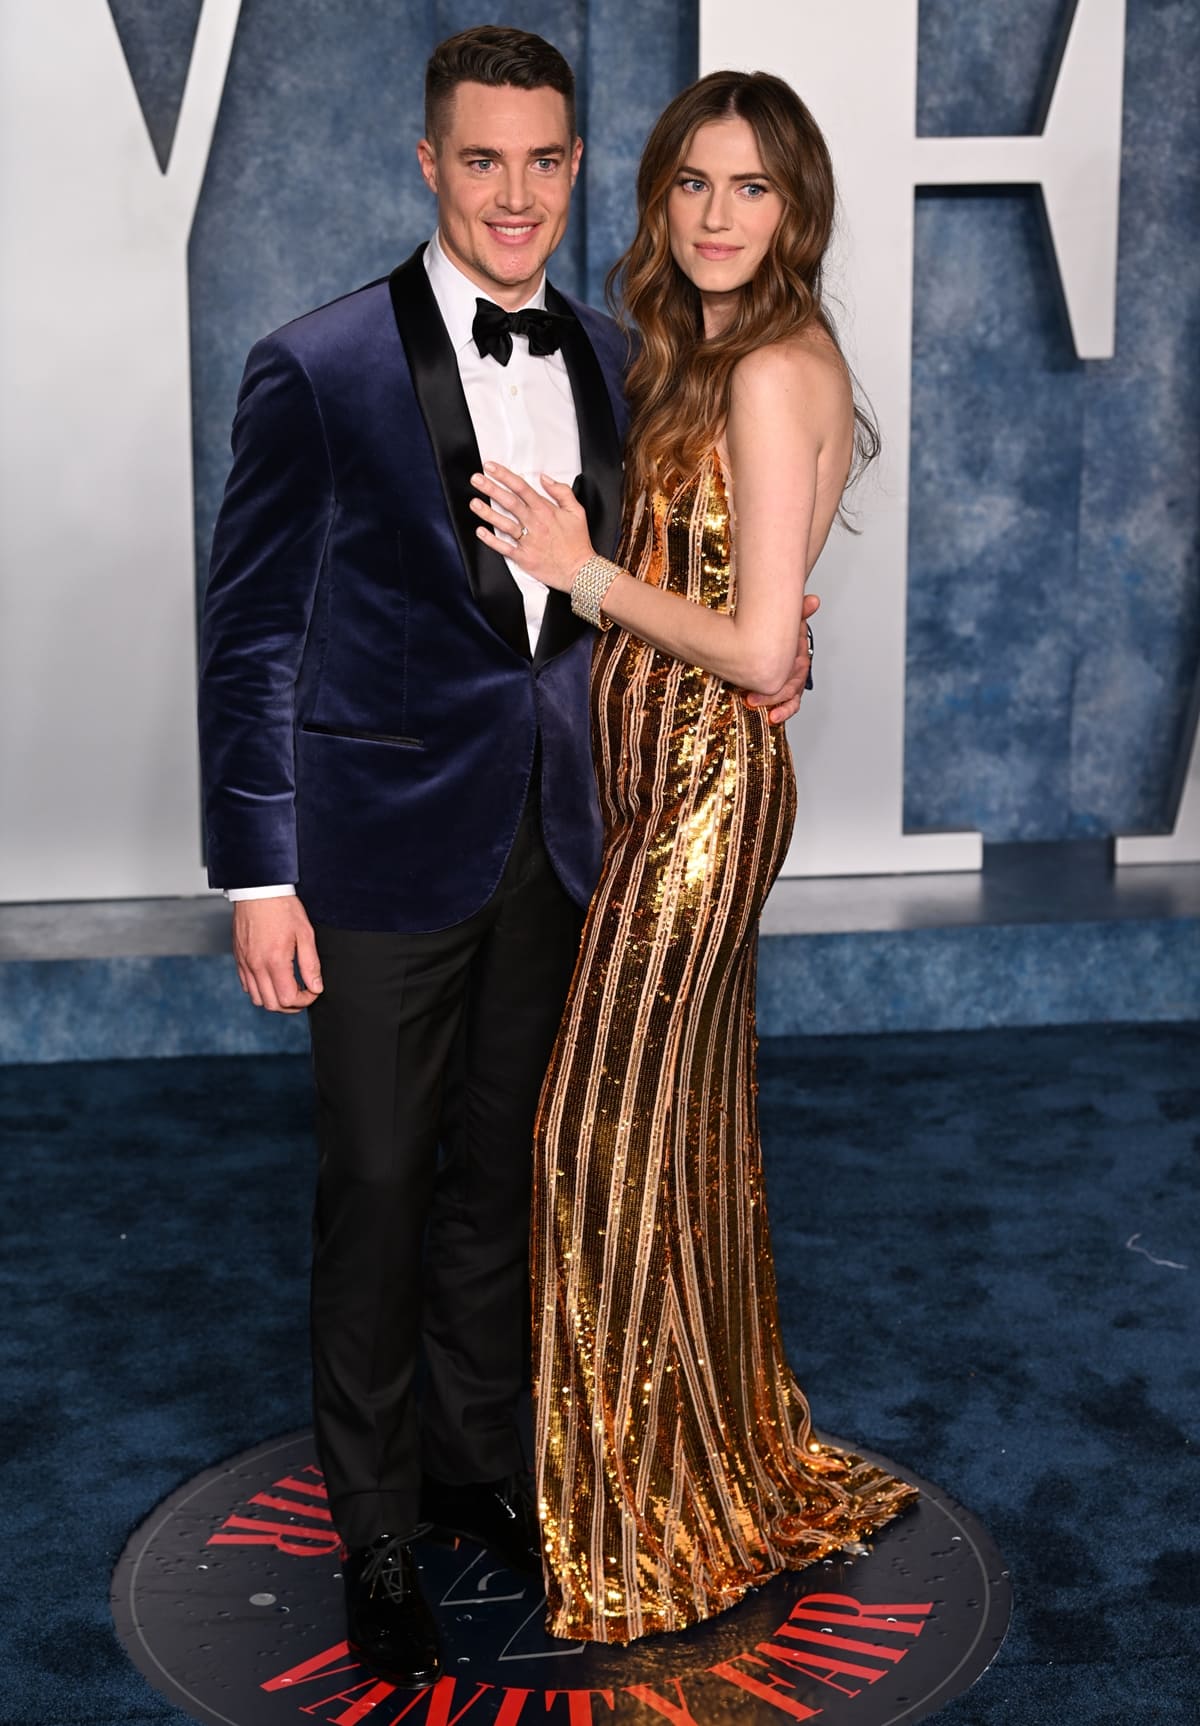 Allison Williams, in a mesmerizing gold gown by Galvan London gracefully complemented with exquisite Cartier Jewelry, with her fiancé Alexander Dreymon